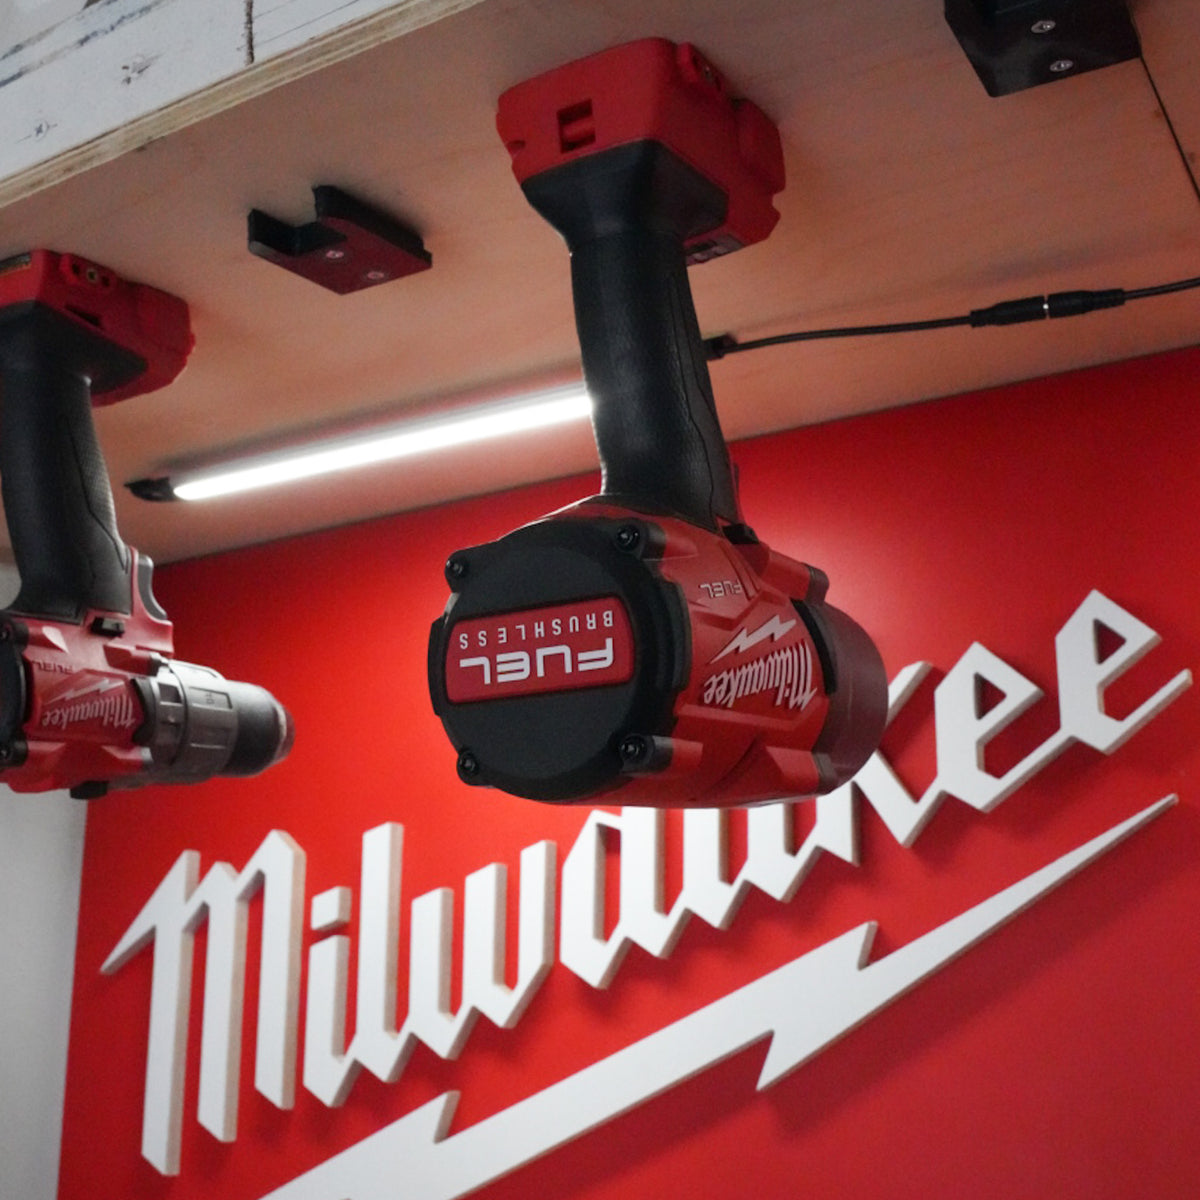 why are milwaukee tools so expensive?